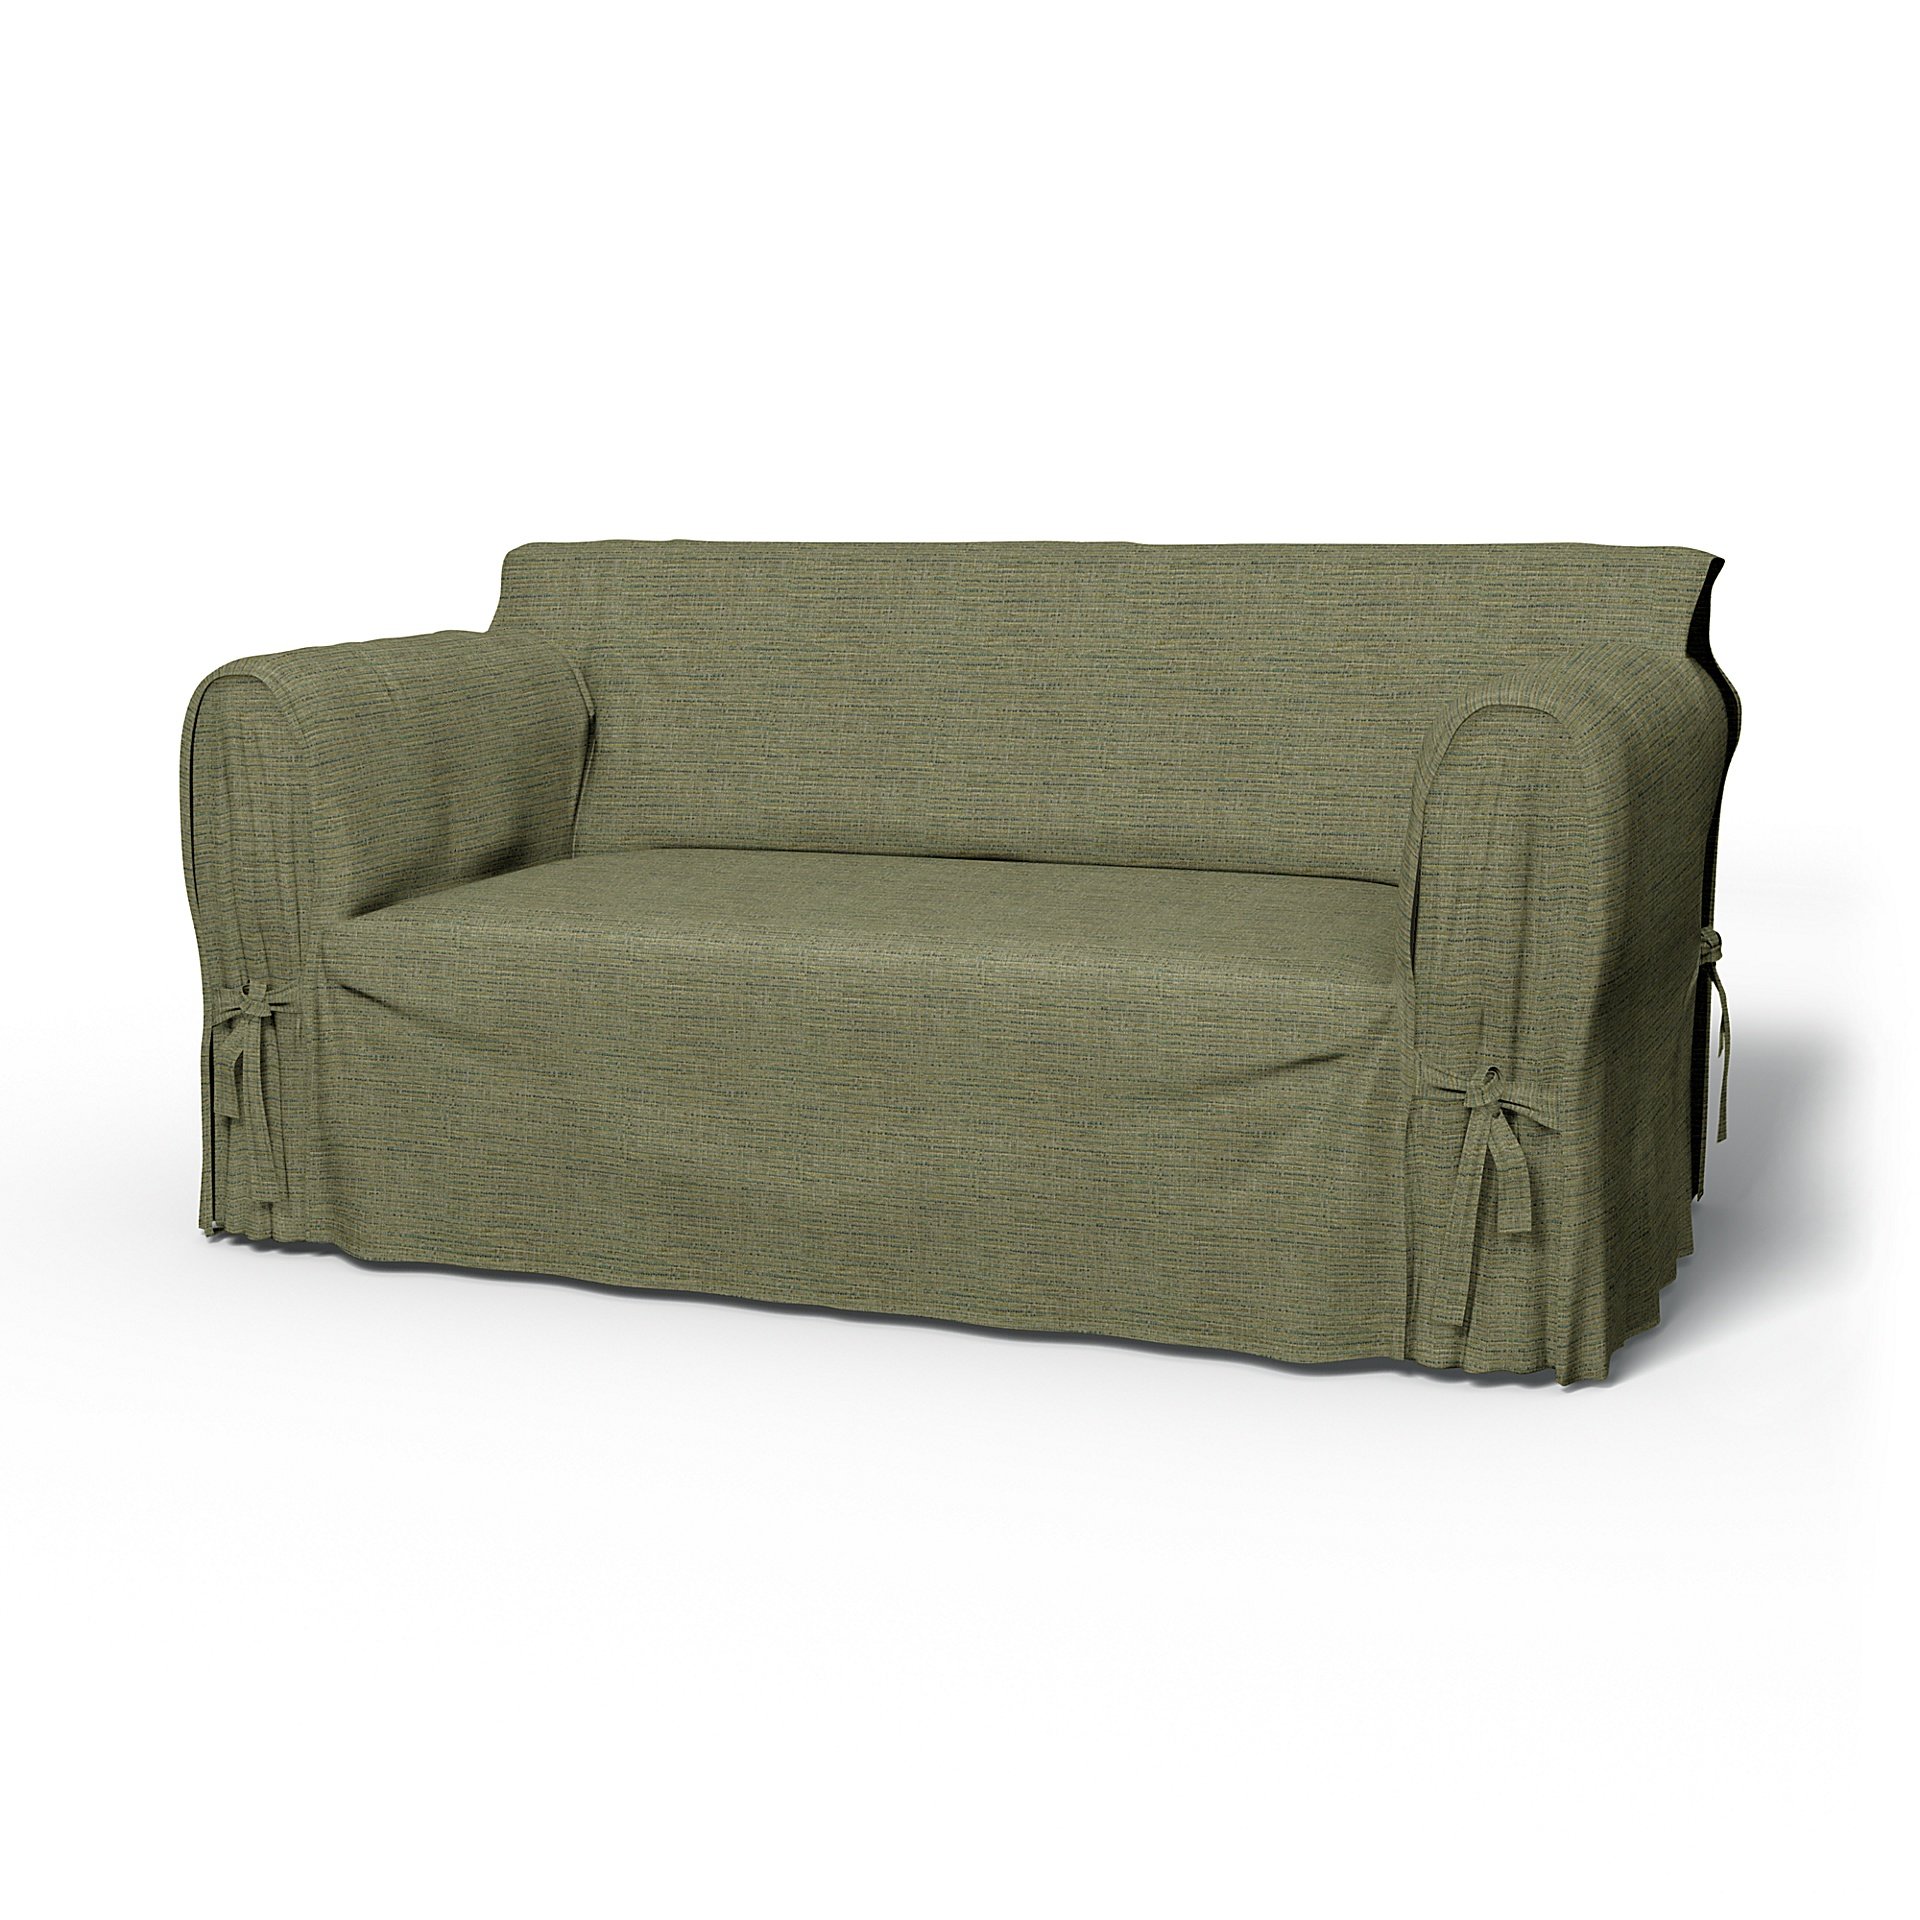 IKEA - Multi Fit 2 Seater Sofa Cover, Meadow Green, Boucle & Texture - Bemz